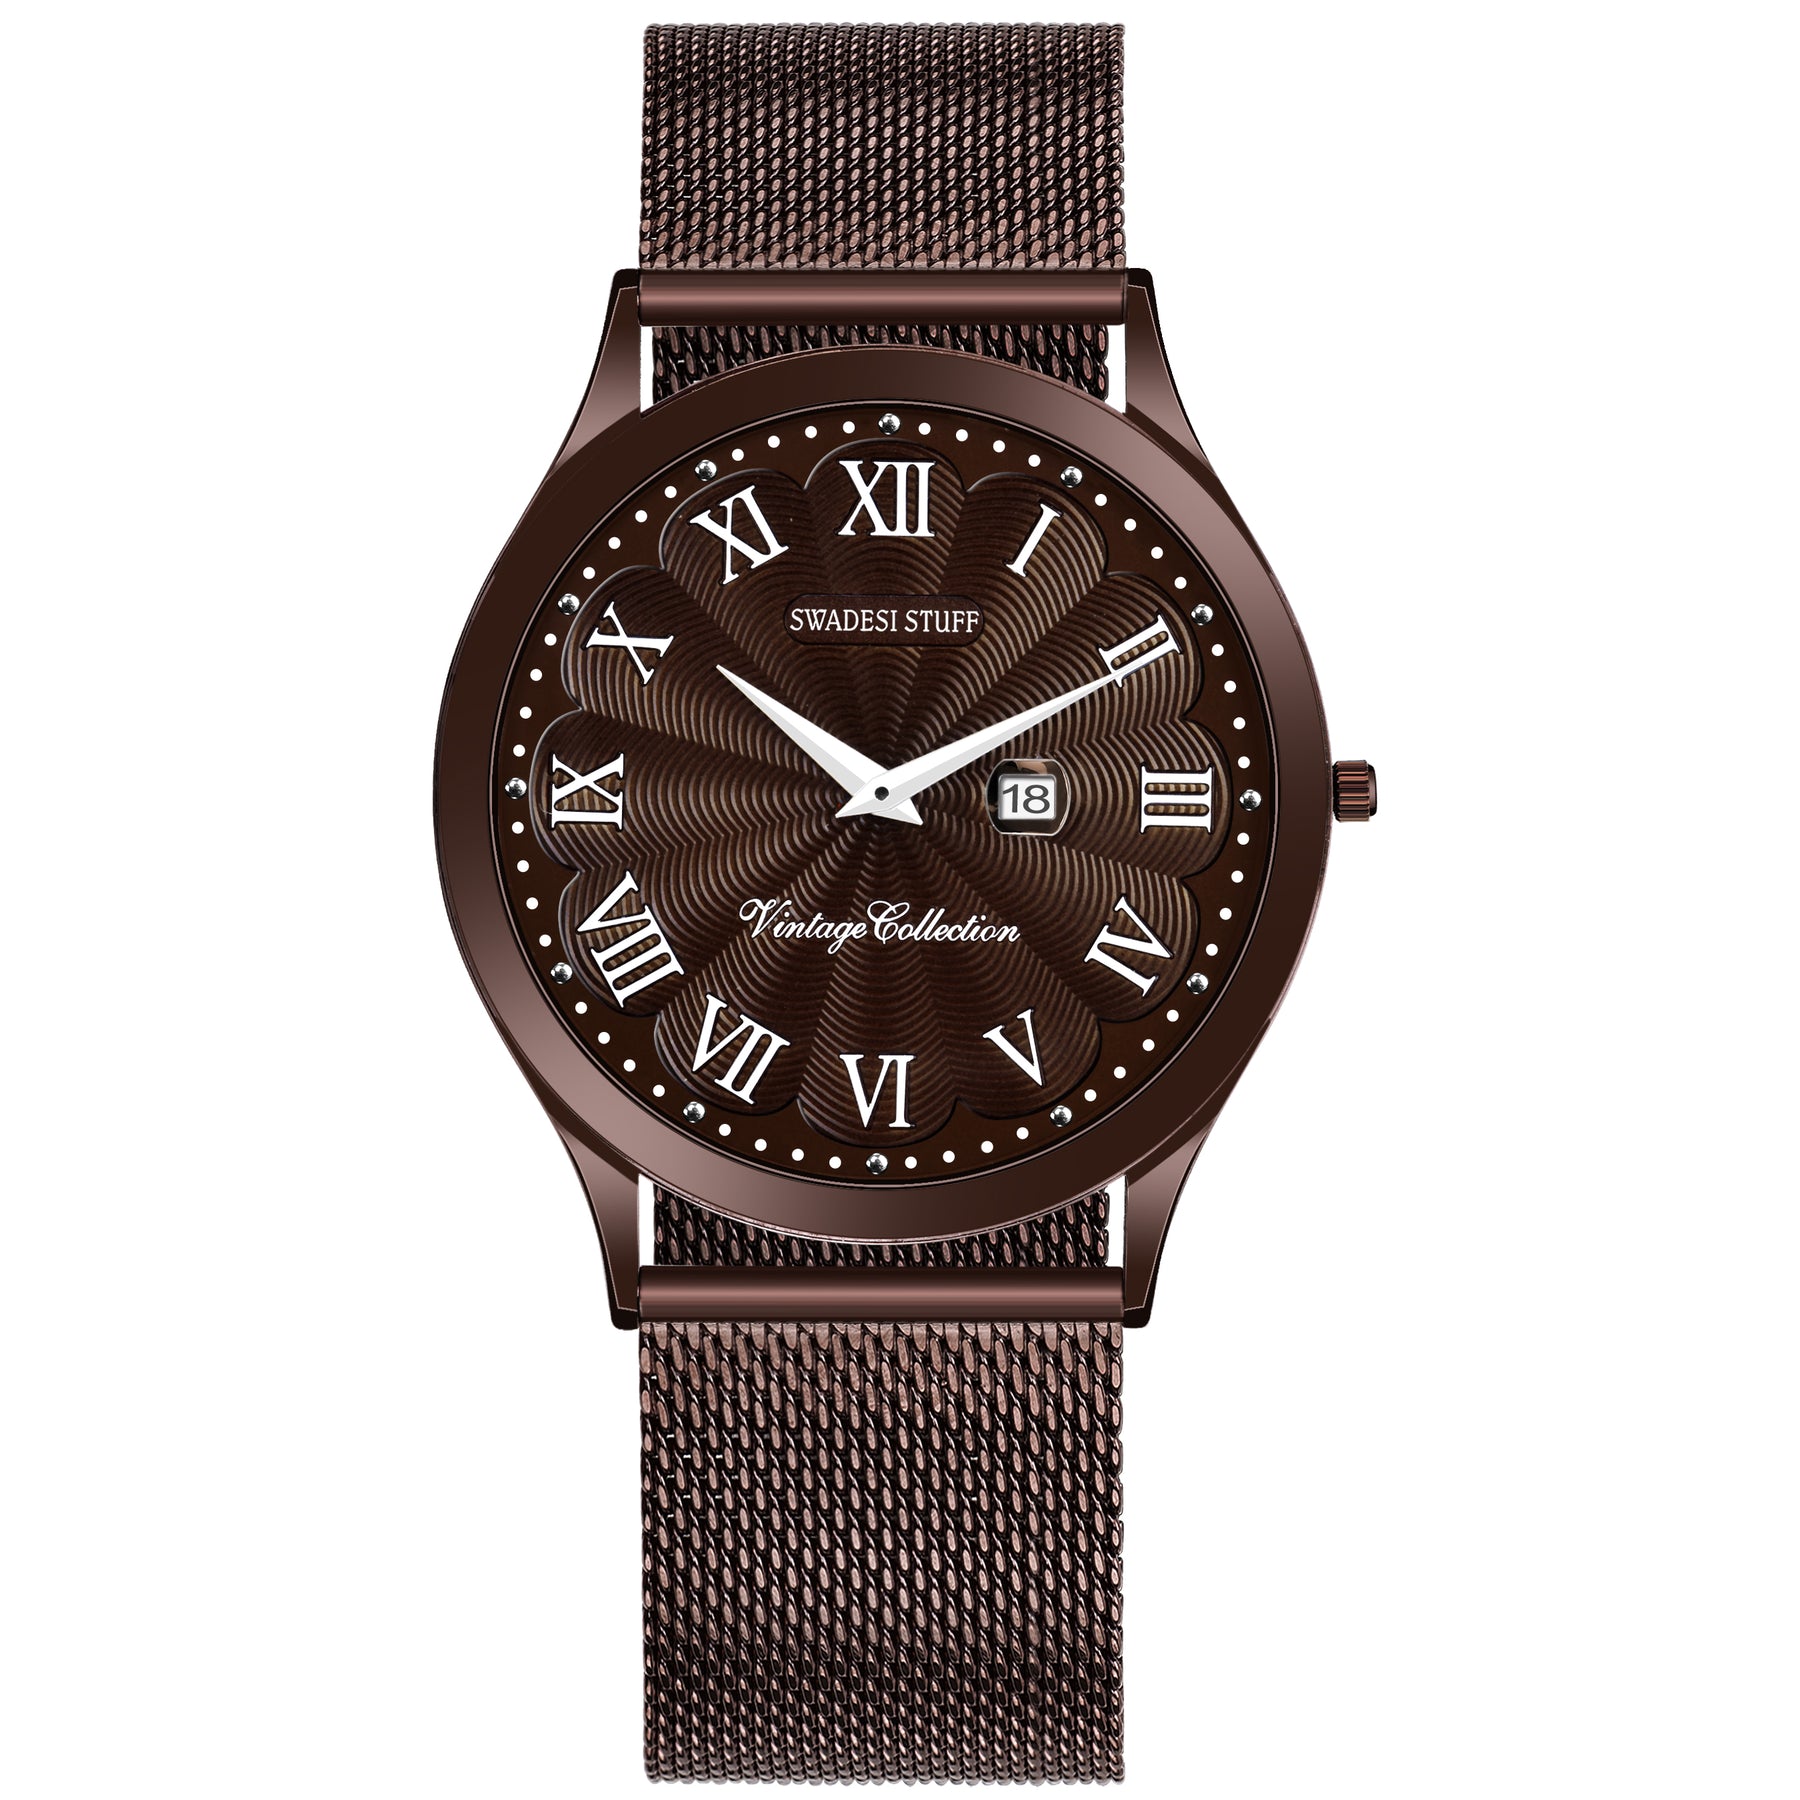 Analogue Brown Fossil Analog Leather Watch, Size: 44, Model Name/Number: Fs  at Rs 1000/piece in Sagar